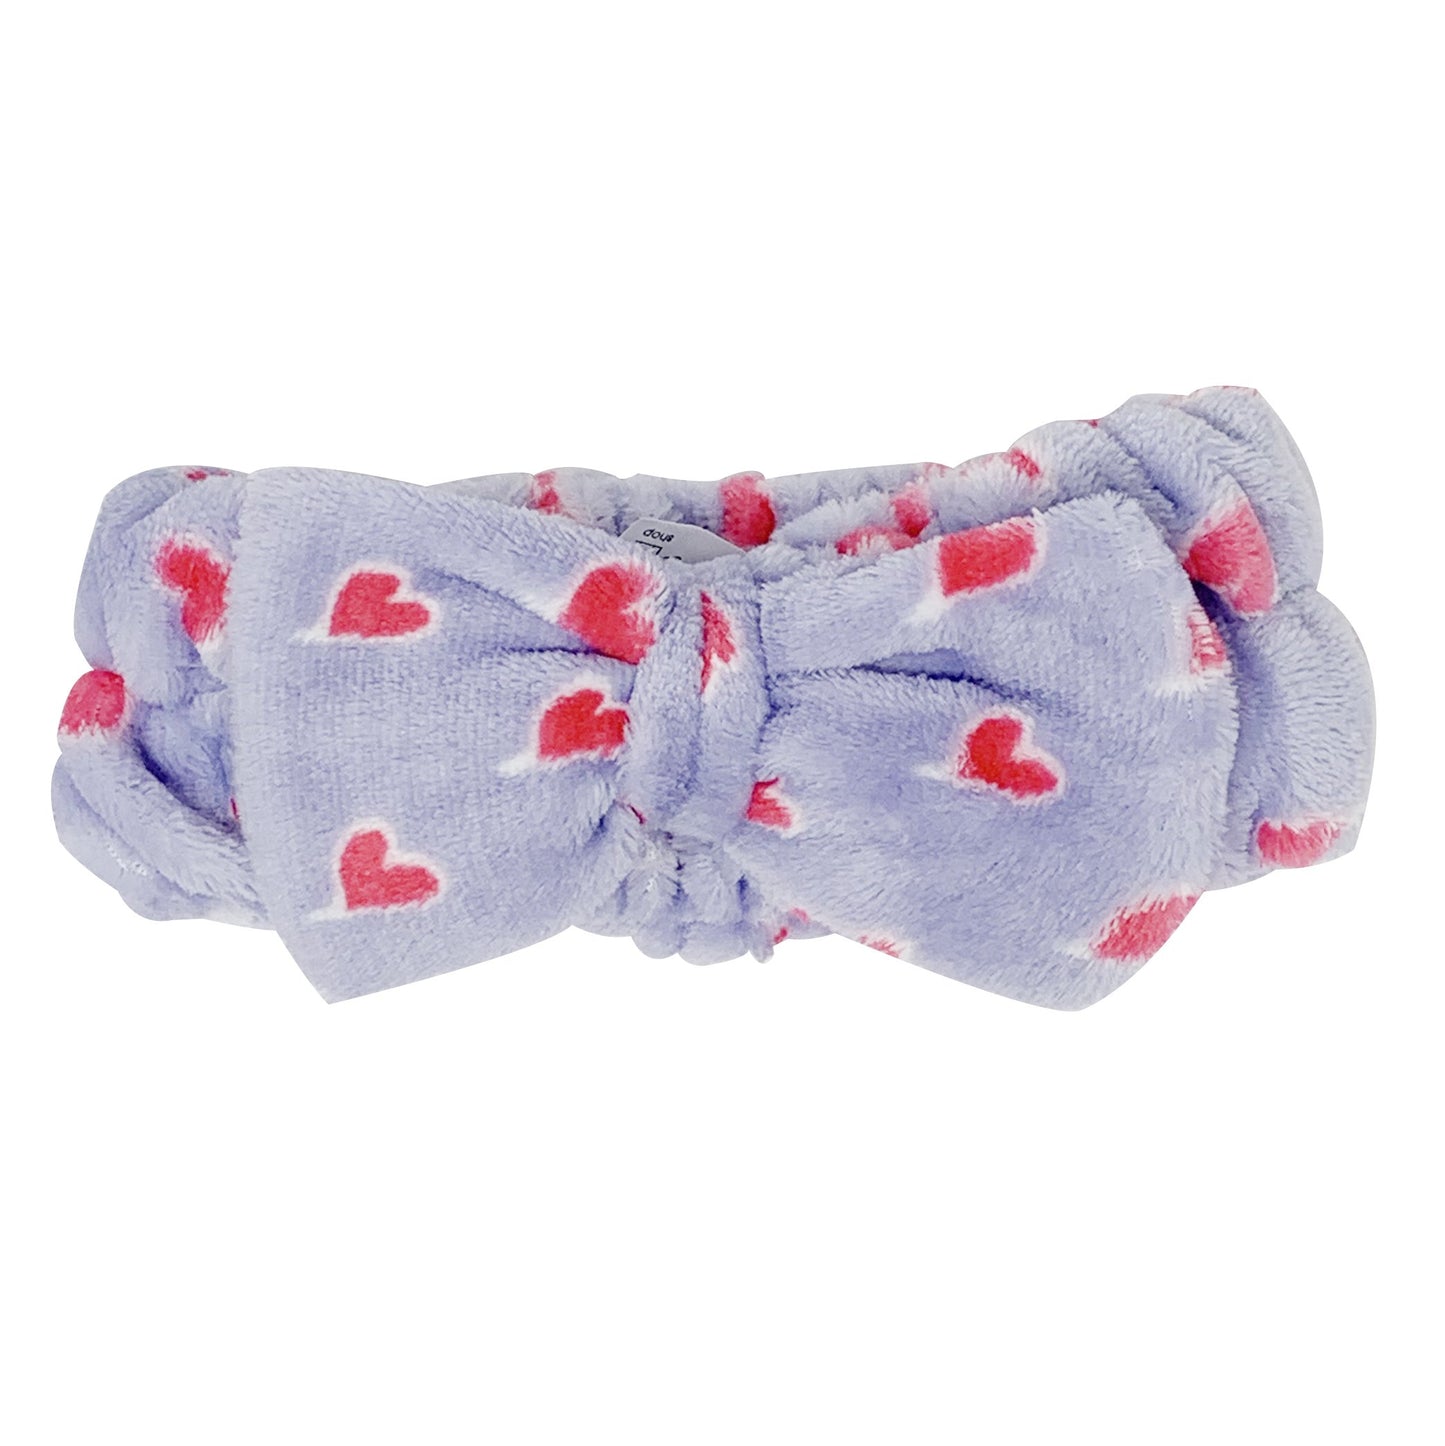 Lavender Purple Teddy Headyband with Pink Hearts - The Crème Shop